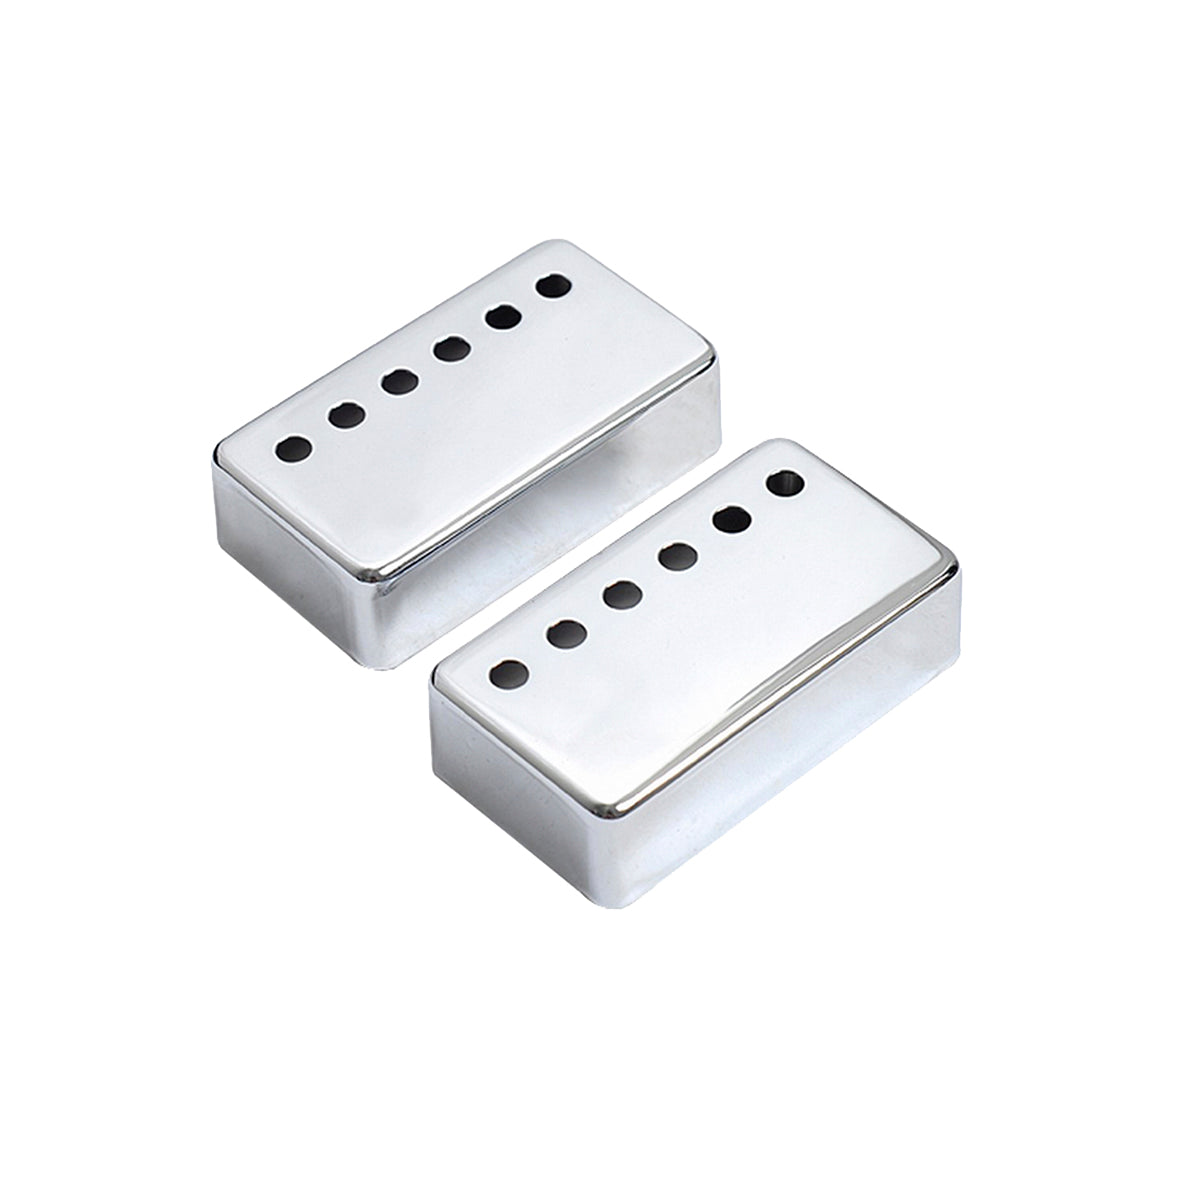 Musiclily 50mm Metal Humbucker Guitar Pickup Covers for Electric Guitar Neck, Chrome (2 Pieces)